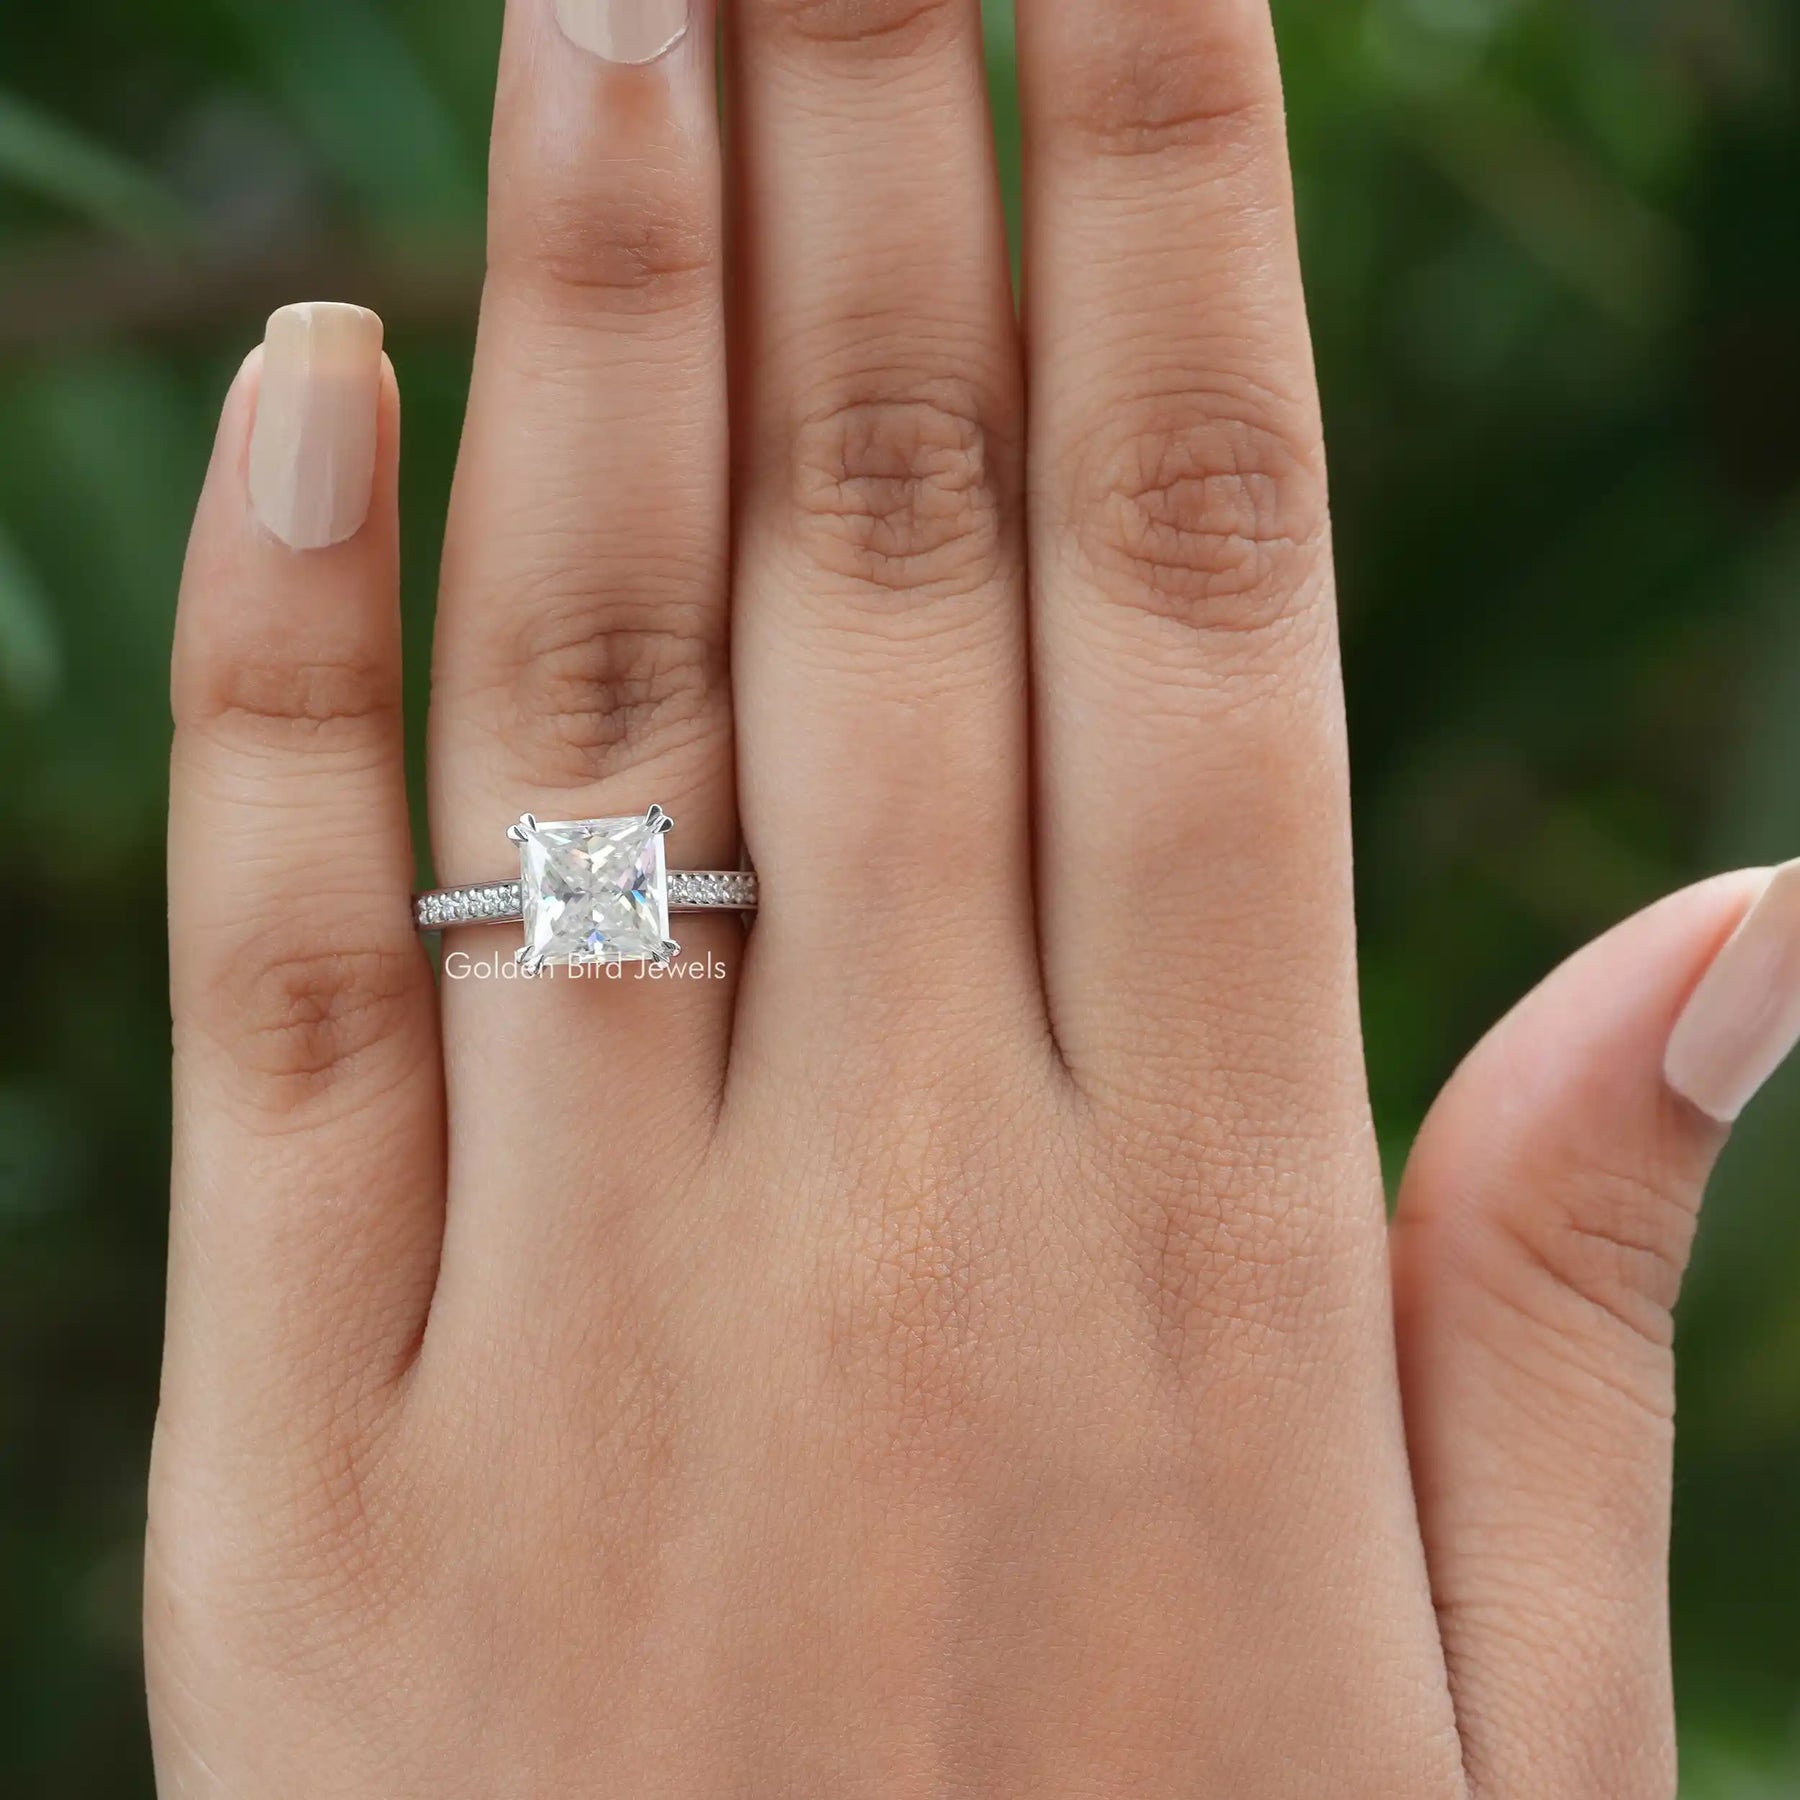 [In finger front view of princess cut moissanite engagement ring made of 18k white gold]-[Golden Bird  Jewels]